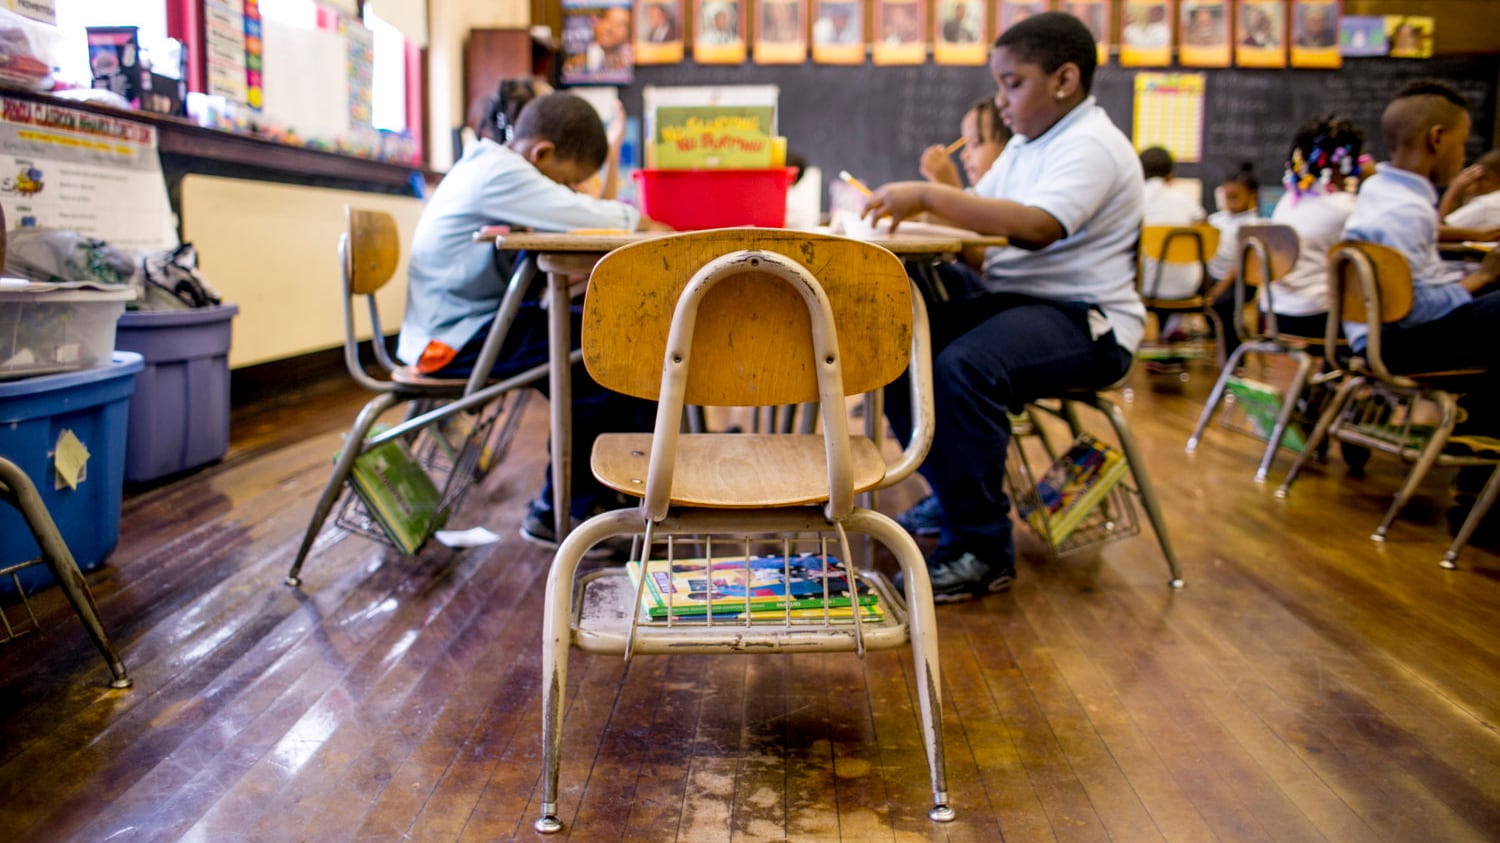 Students sit at tables in a classroom with a wooden floor an a window on the left and a chalkboard in the background.